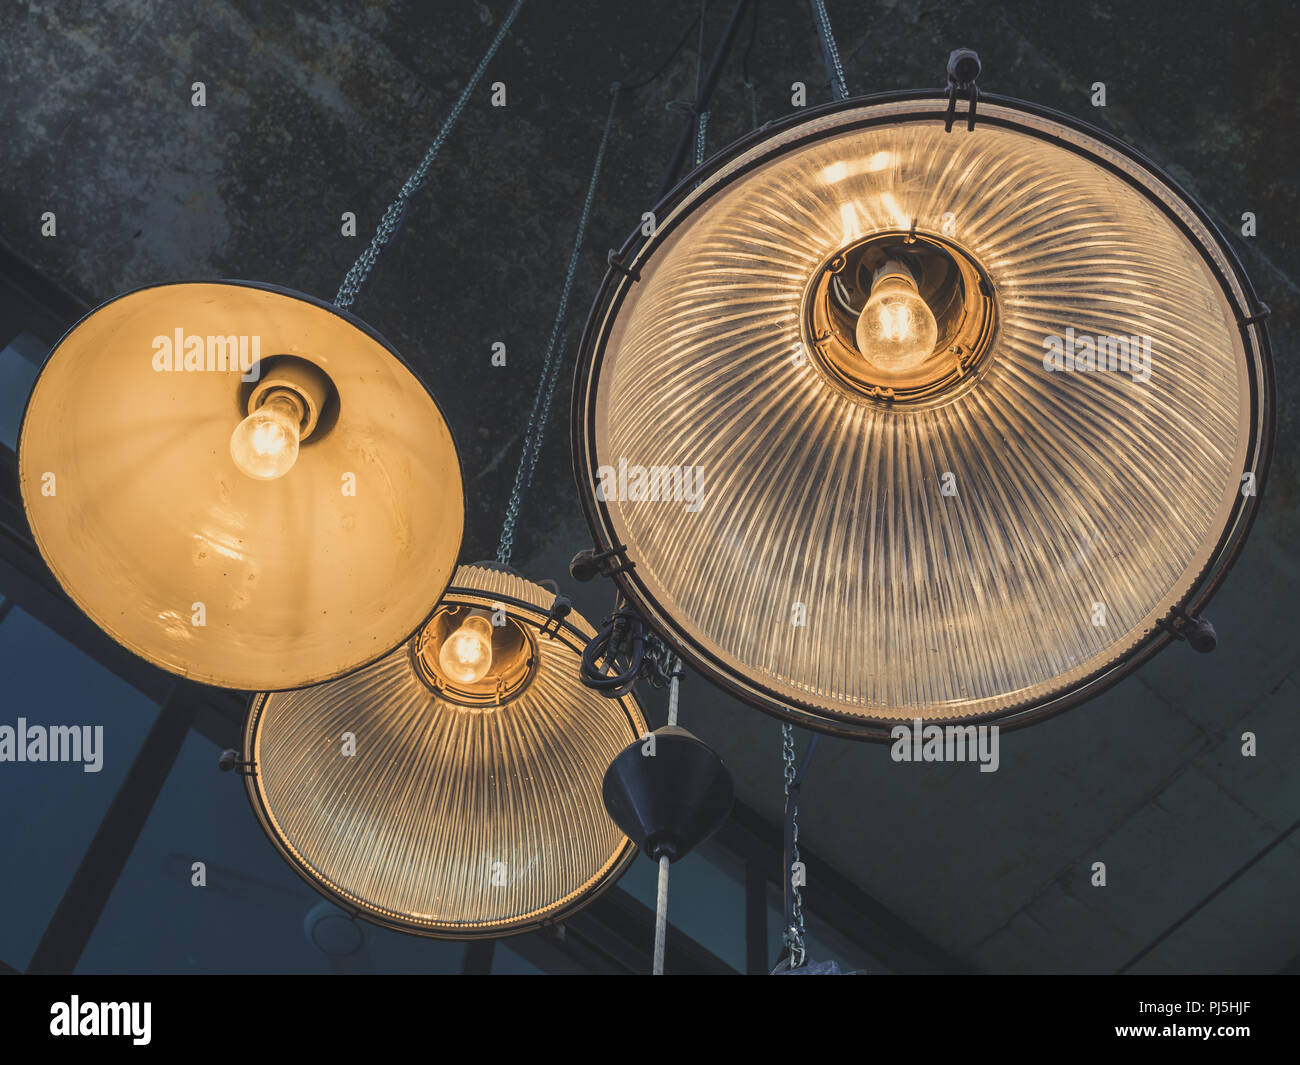 A Group Of Hanging Lights Or Ceiling Lamps On Cement Texture